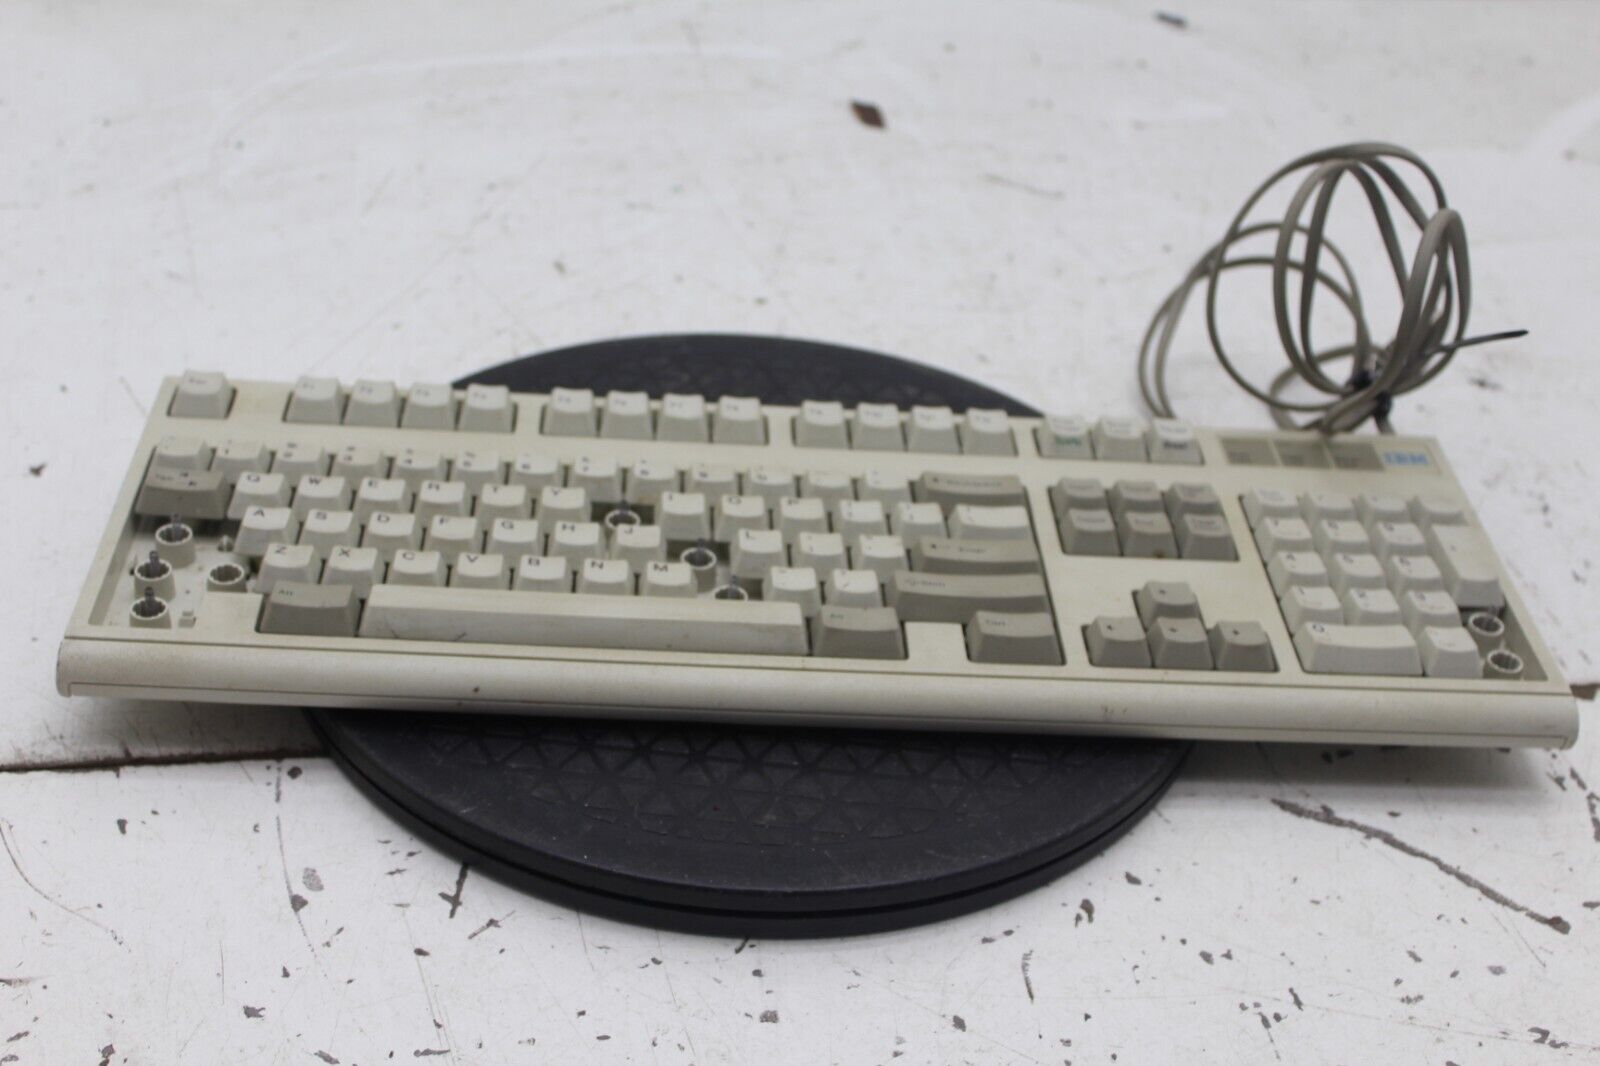 IBM Model M2 1395300 Vintage PS/2 Mechanical Clicky Keyboard - TESTED - READ